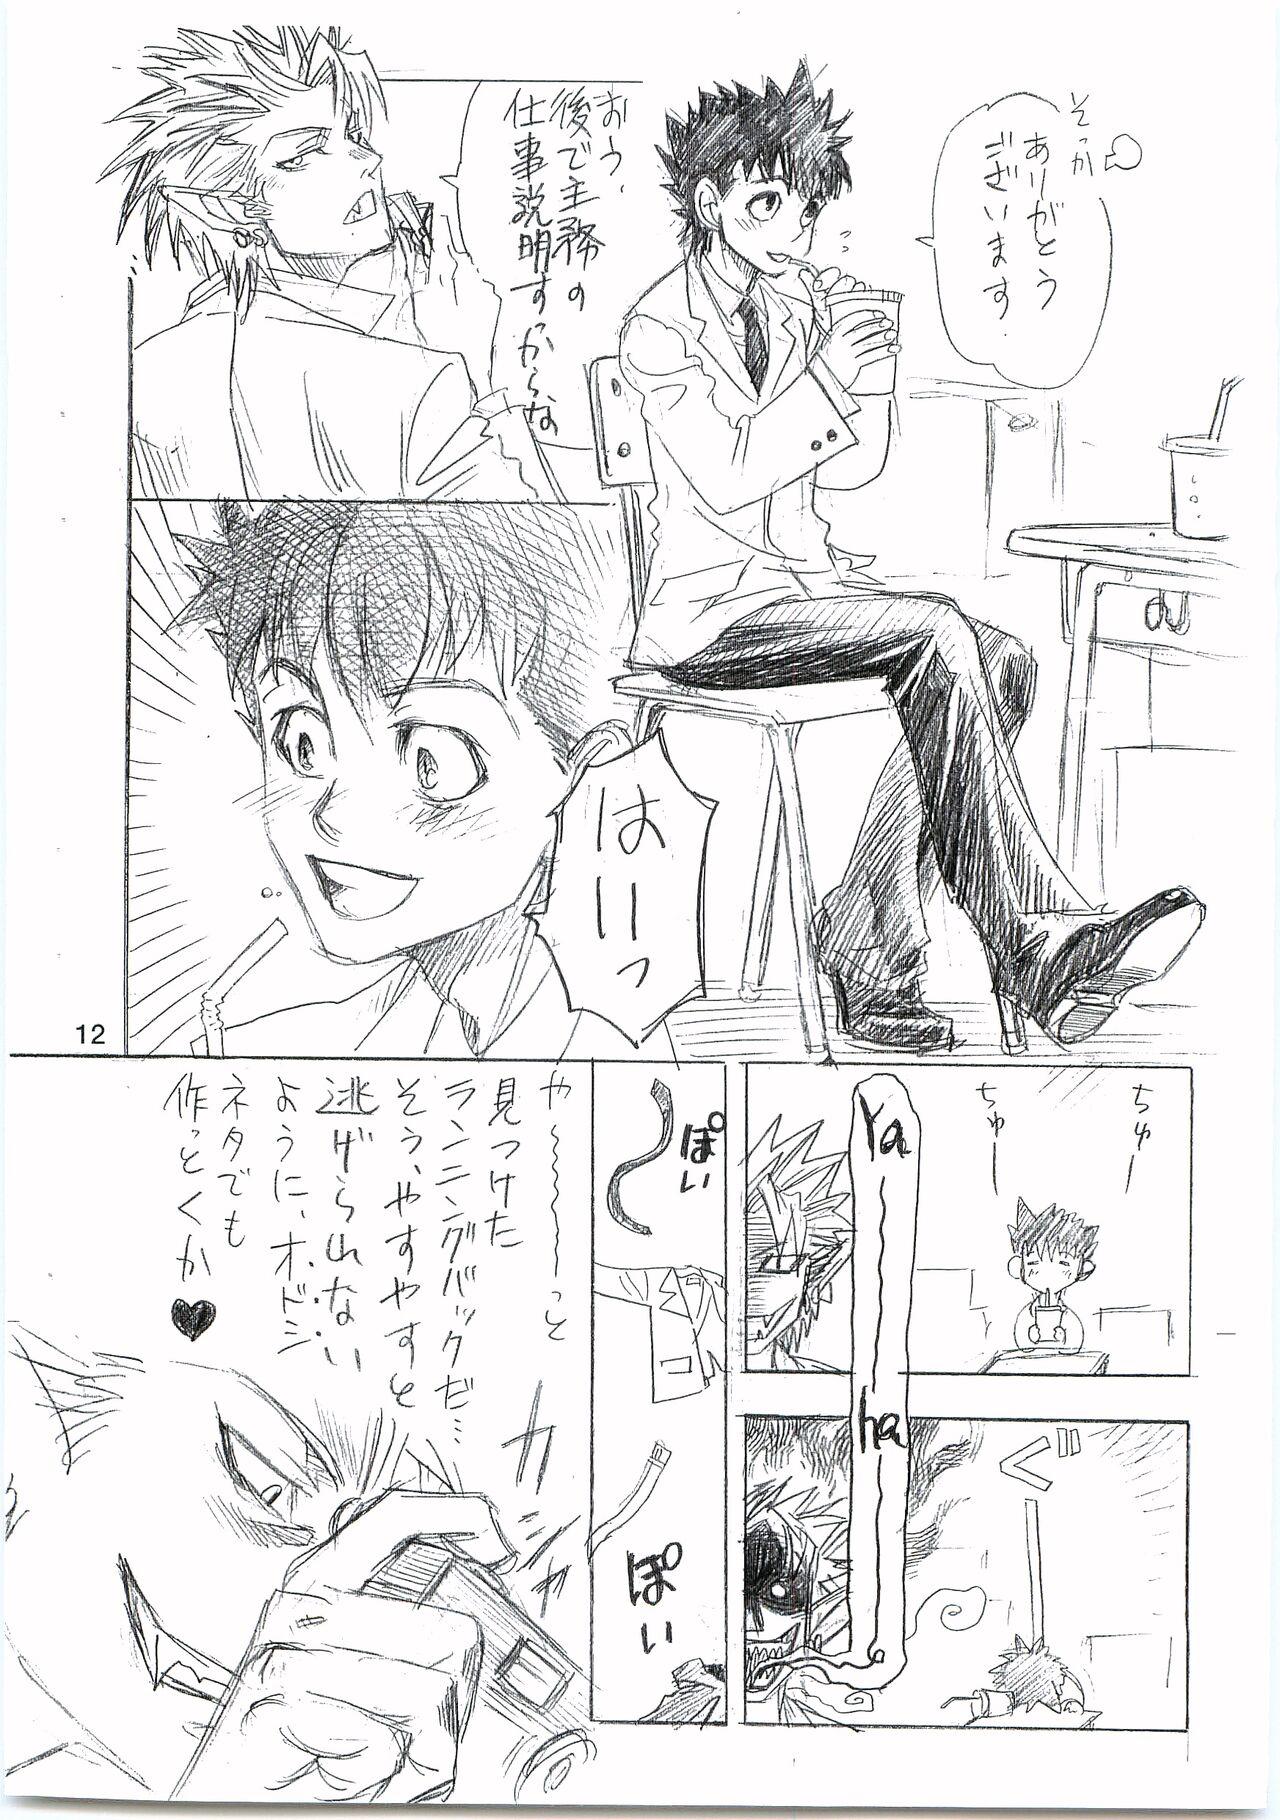 Cougars devil mania - Eyeshield 21 Twink - Page 11